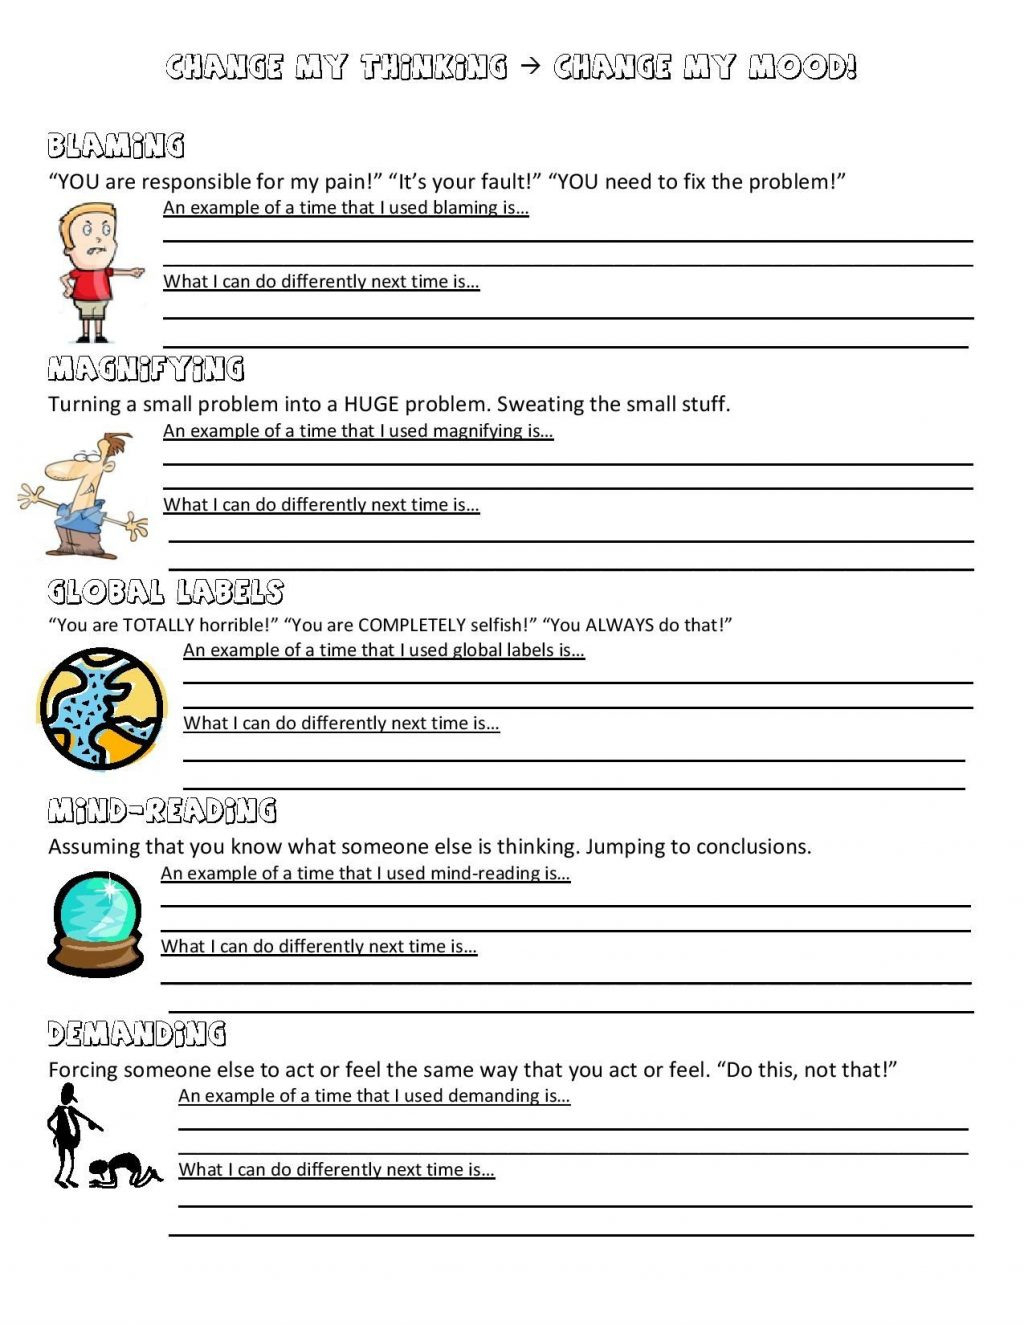 Worksheet Ideas Conflict Resolution For Teenagers Db 